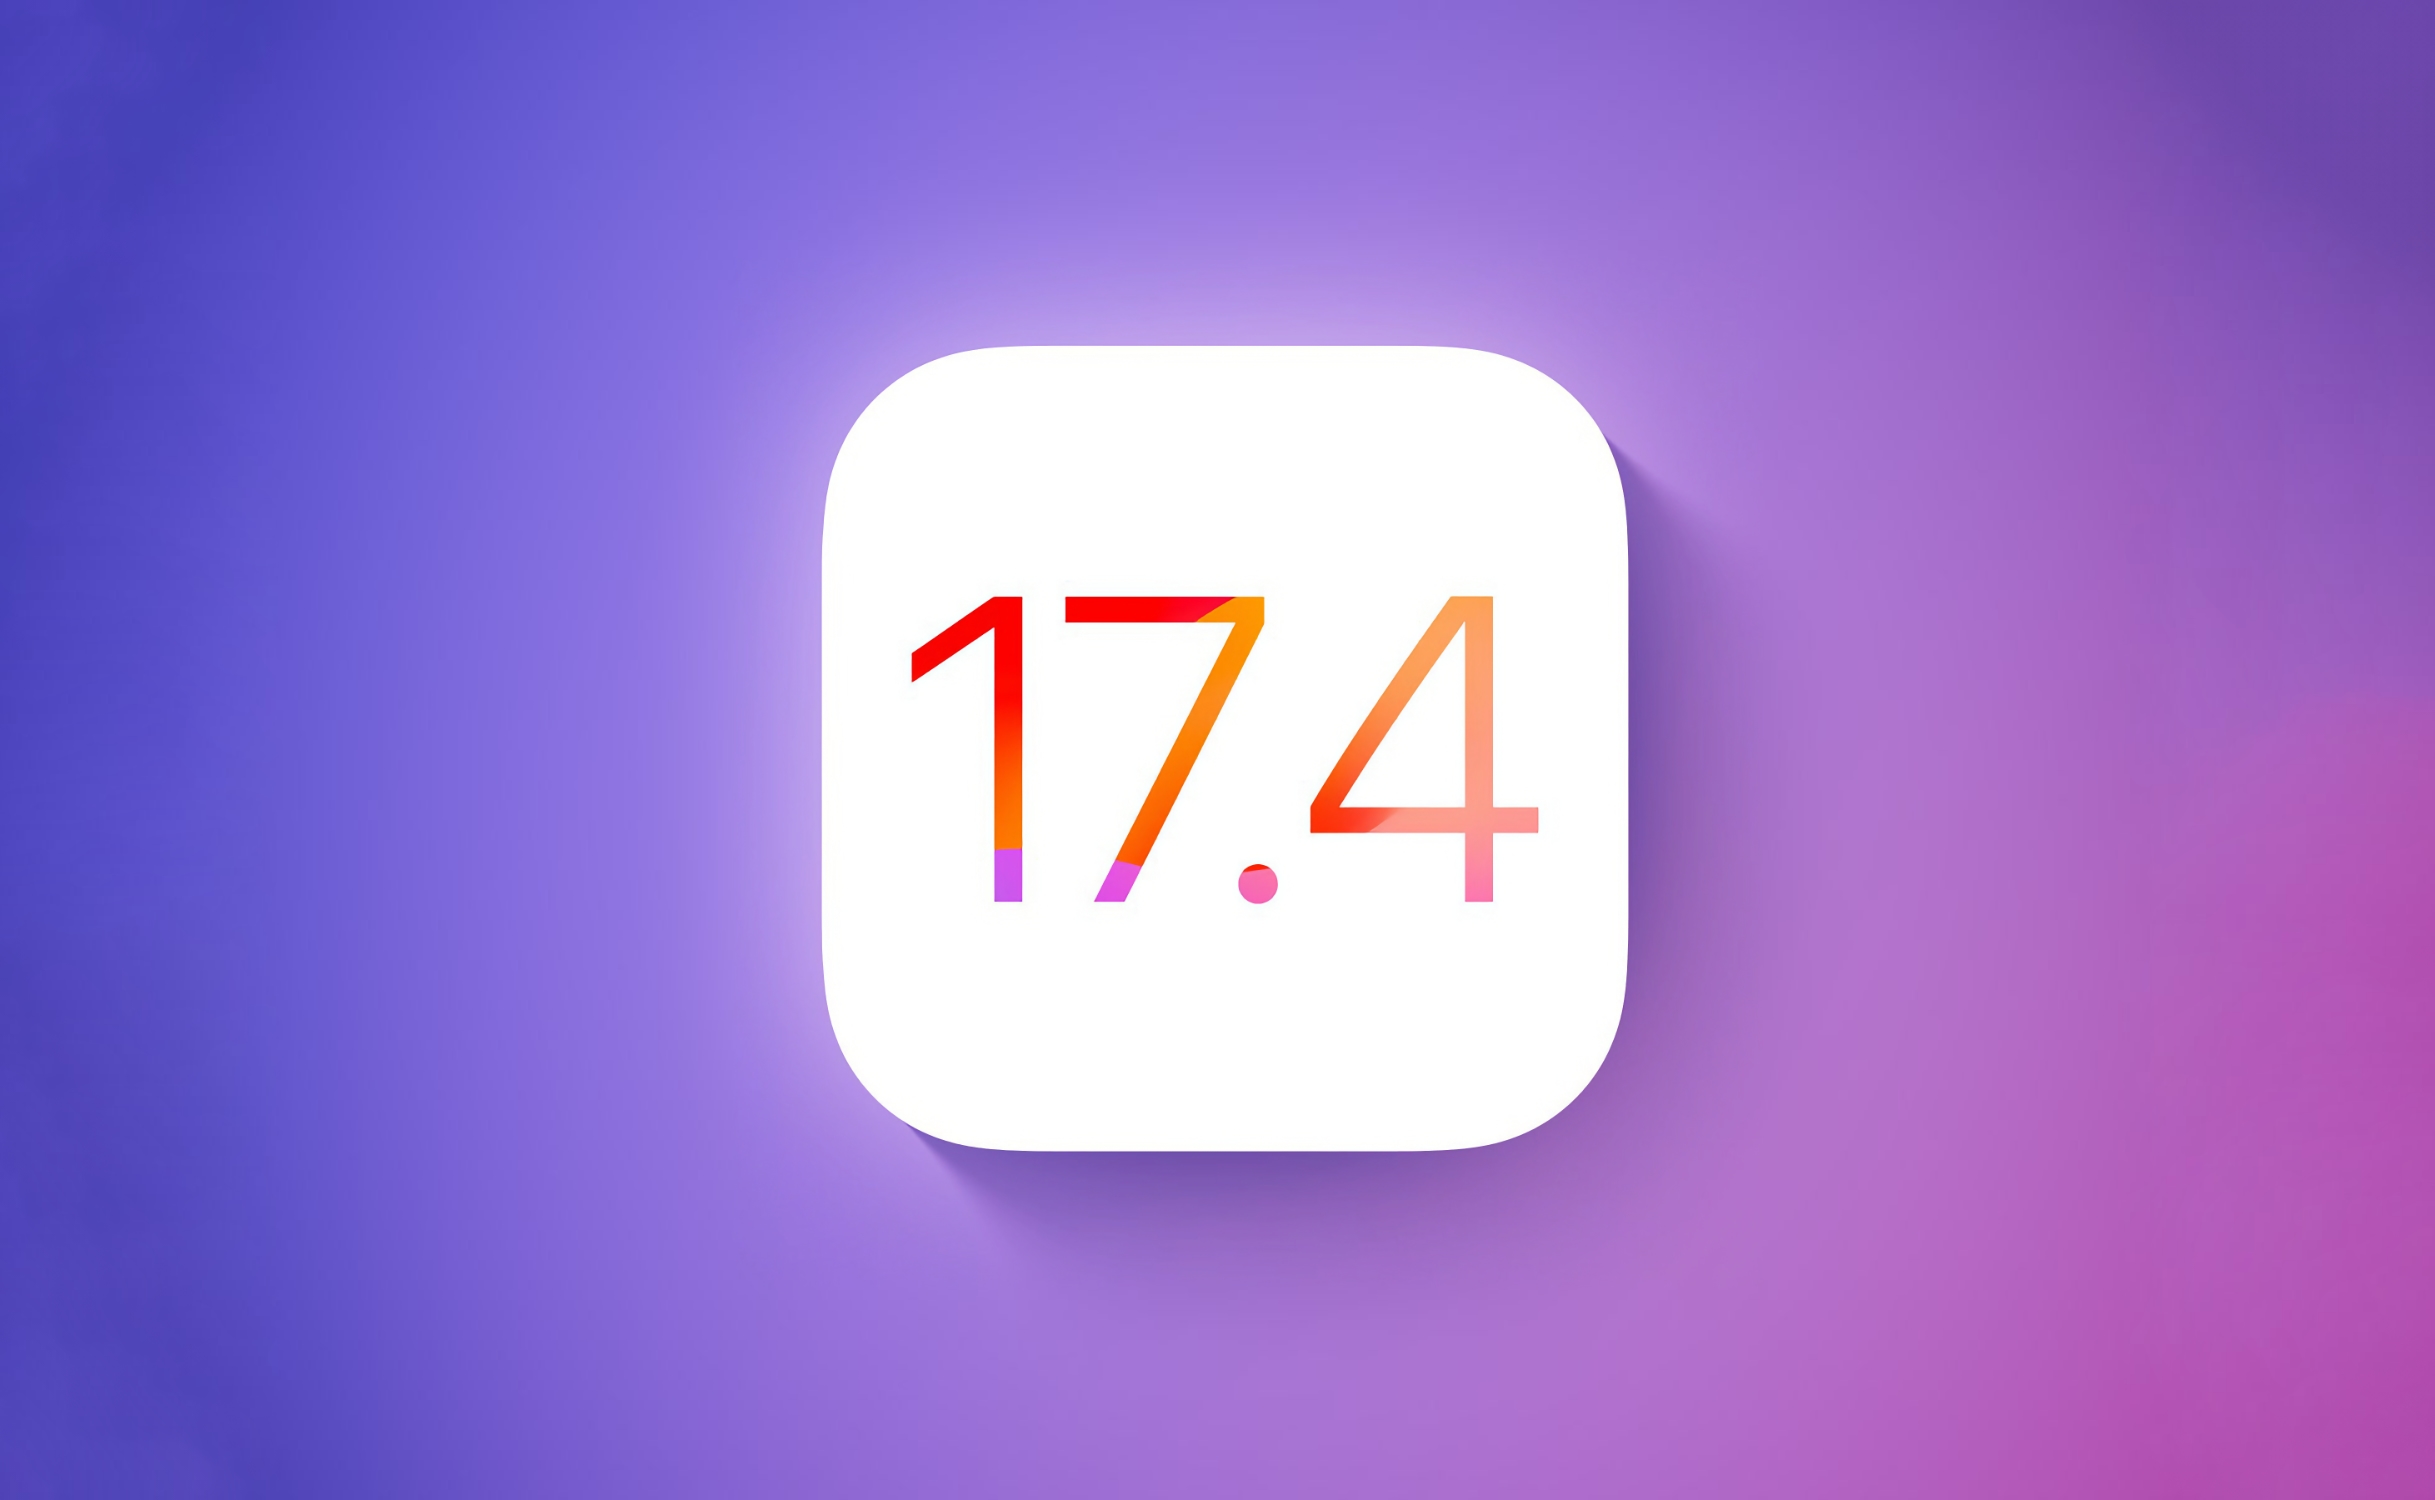 The stable version of iOS 17.4 is out: what's new